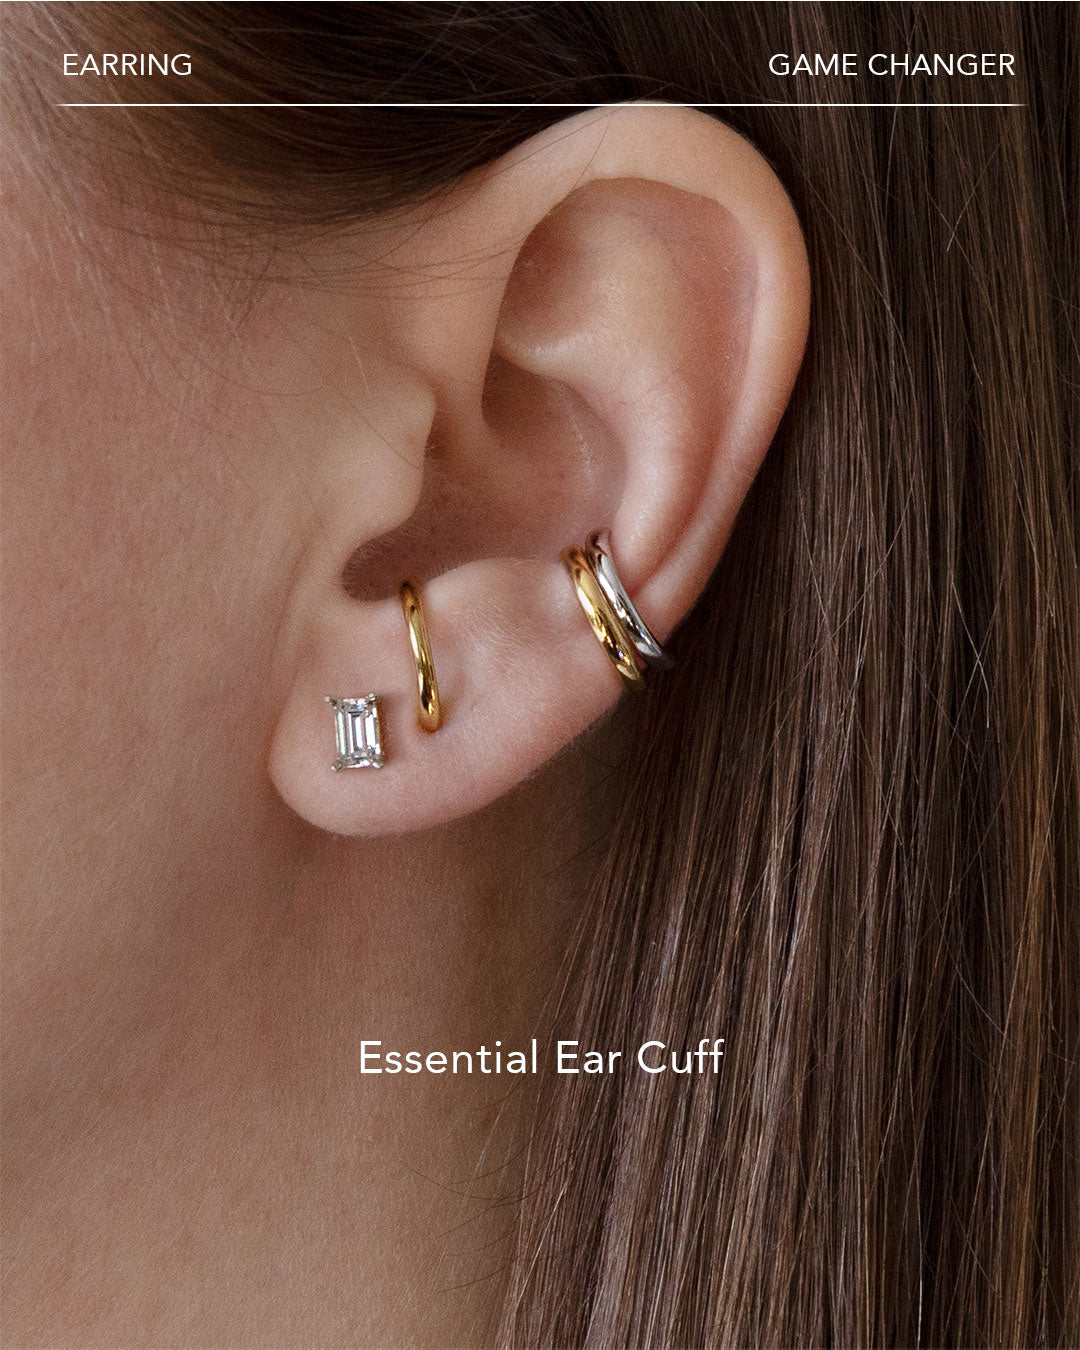 How to Style Ear Cuffs